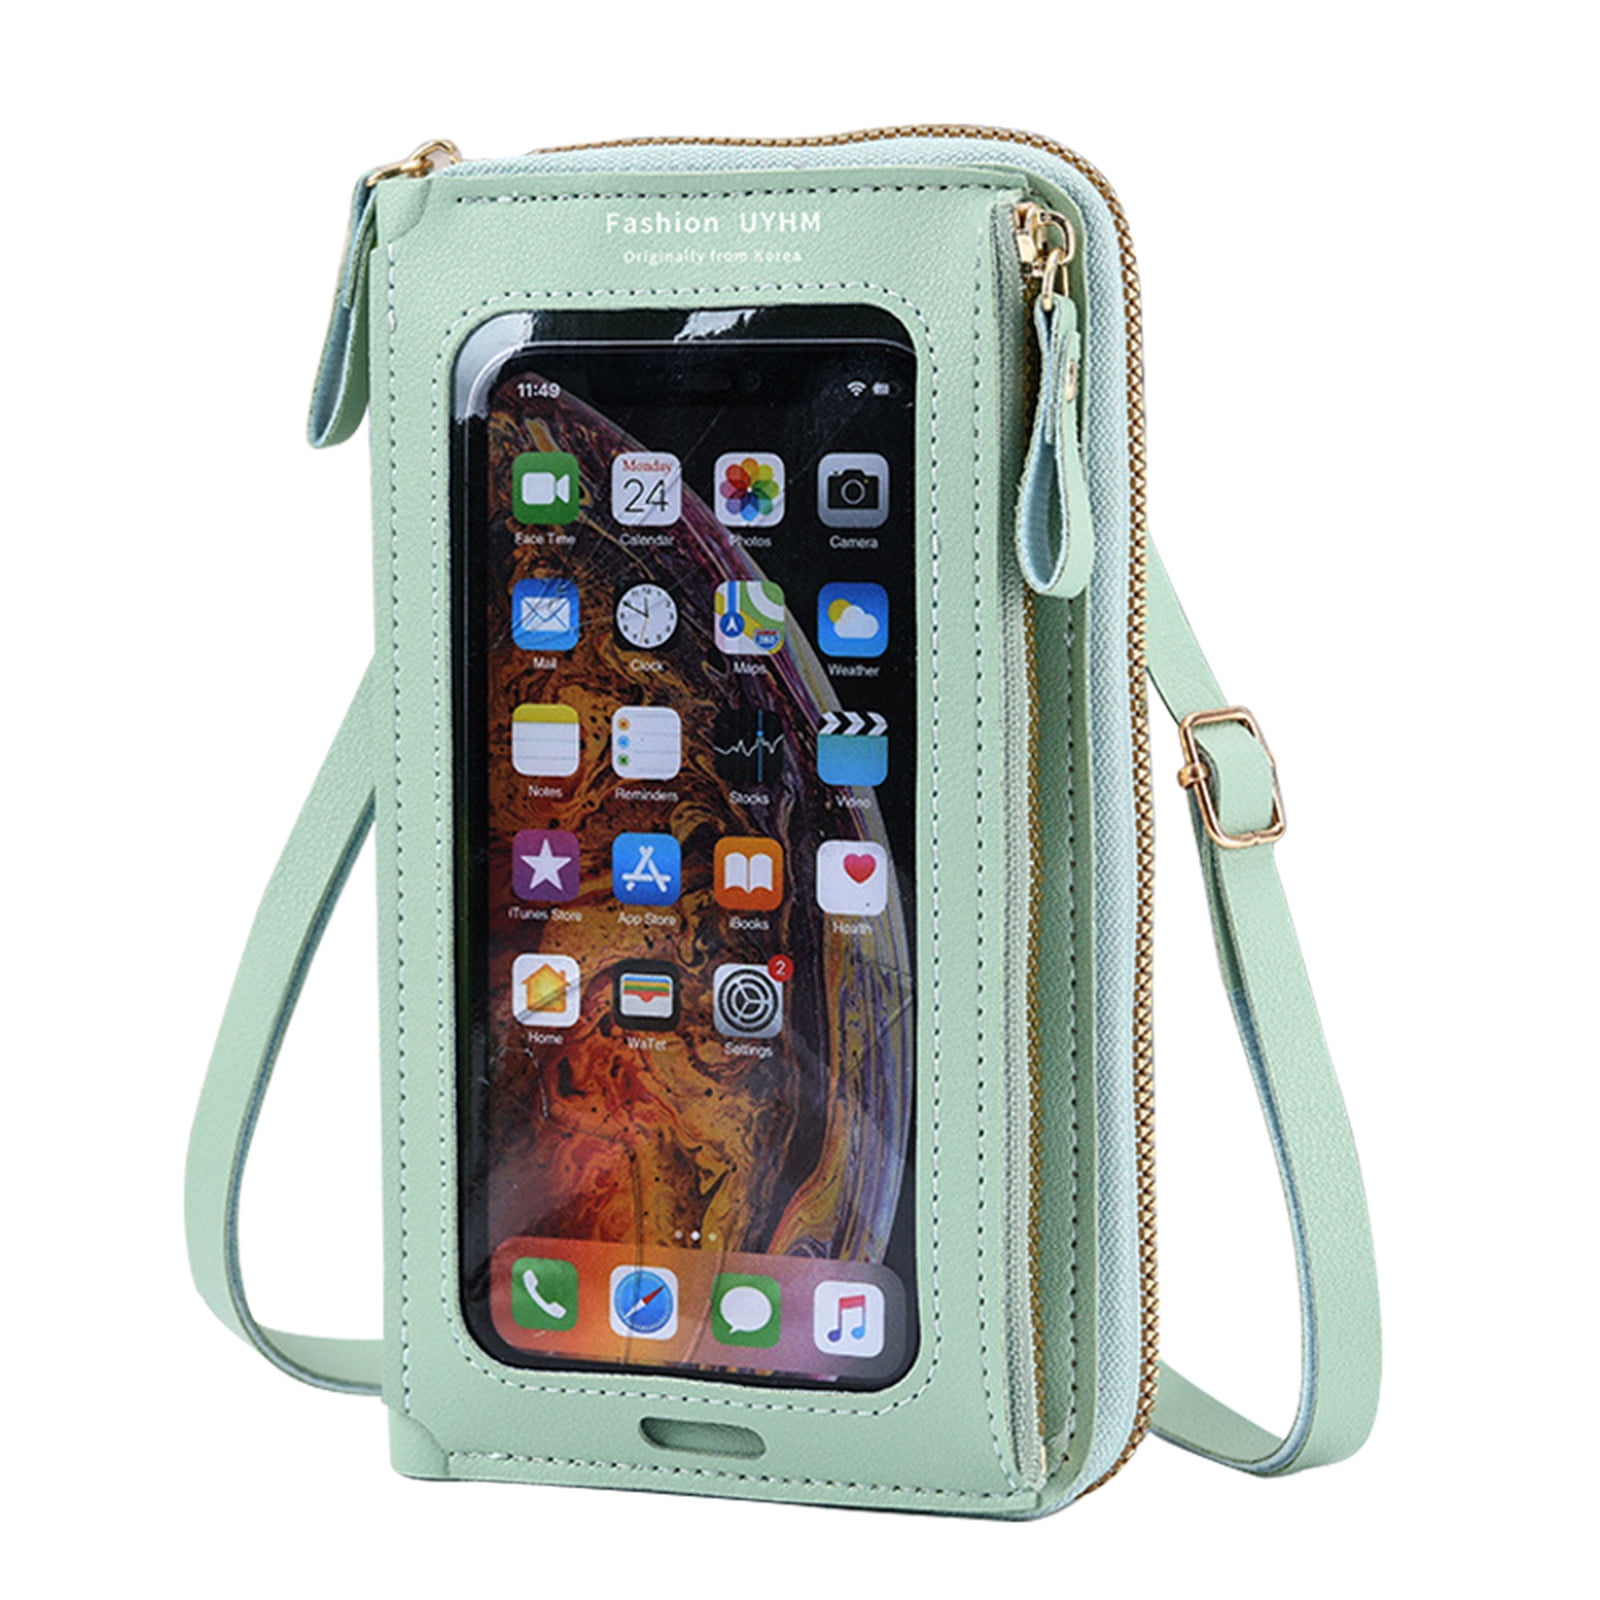 Empire Cove Cell Phone Crossbody Bags Touchscreen Clear Window Wallet |  Wallet pouch, Crossbody bag, Purse wallet